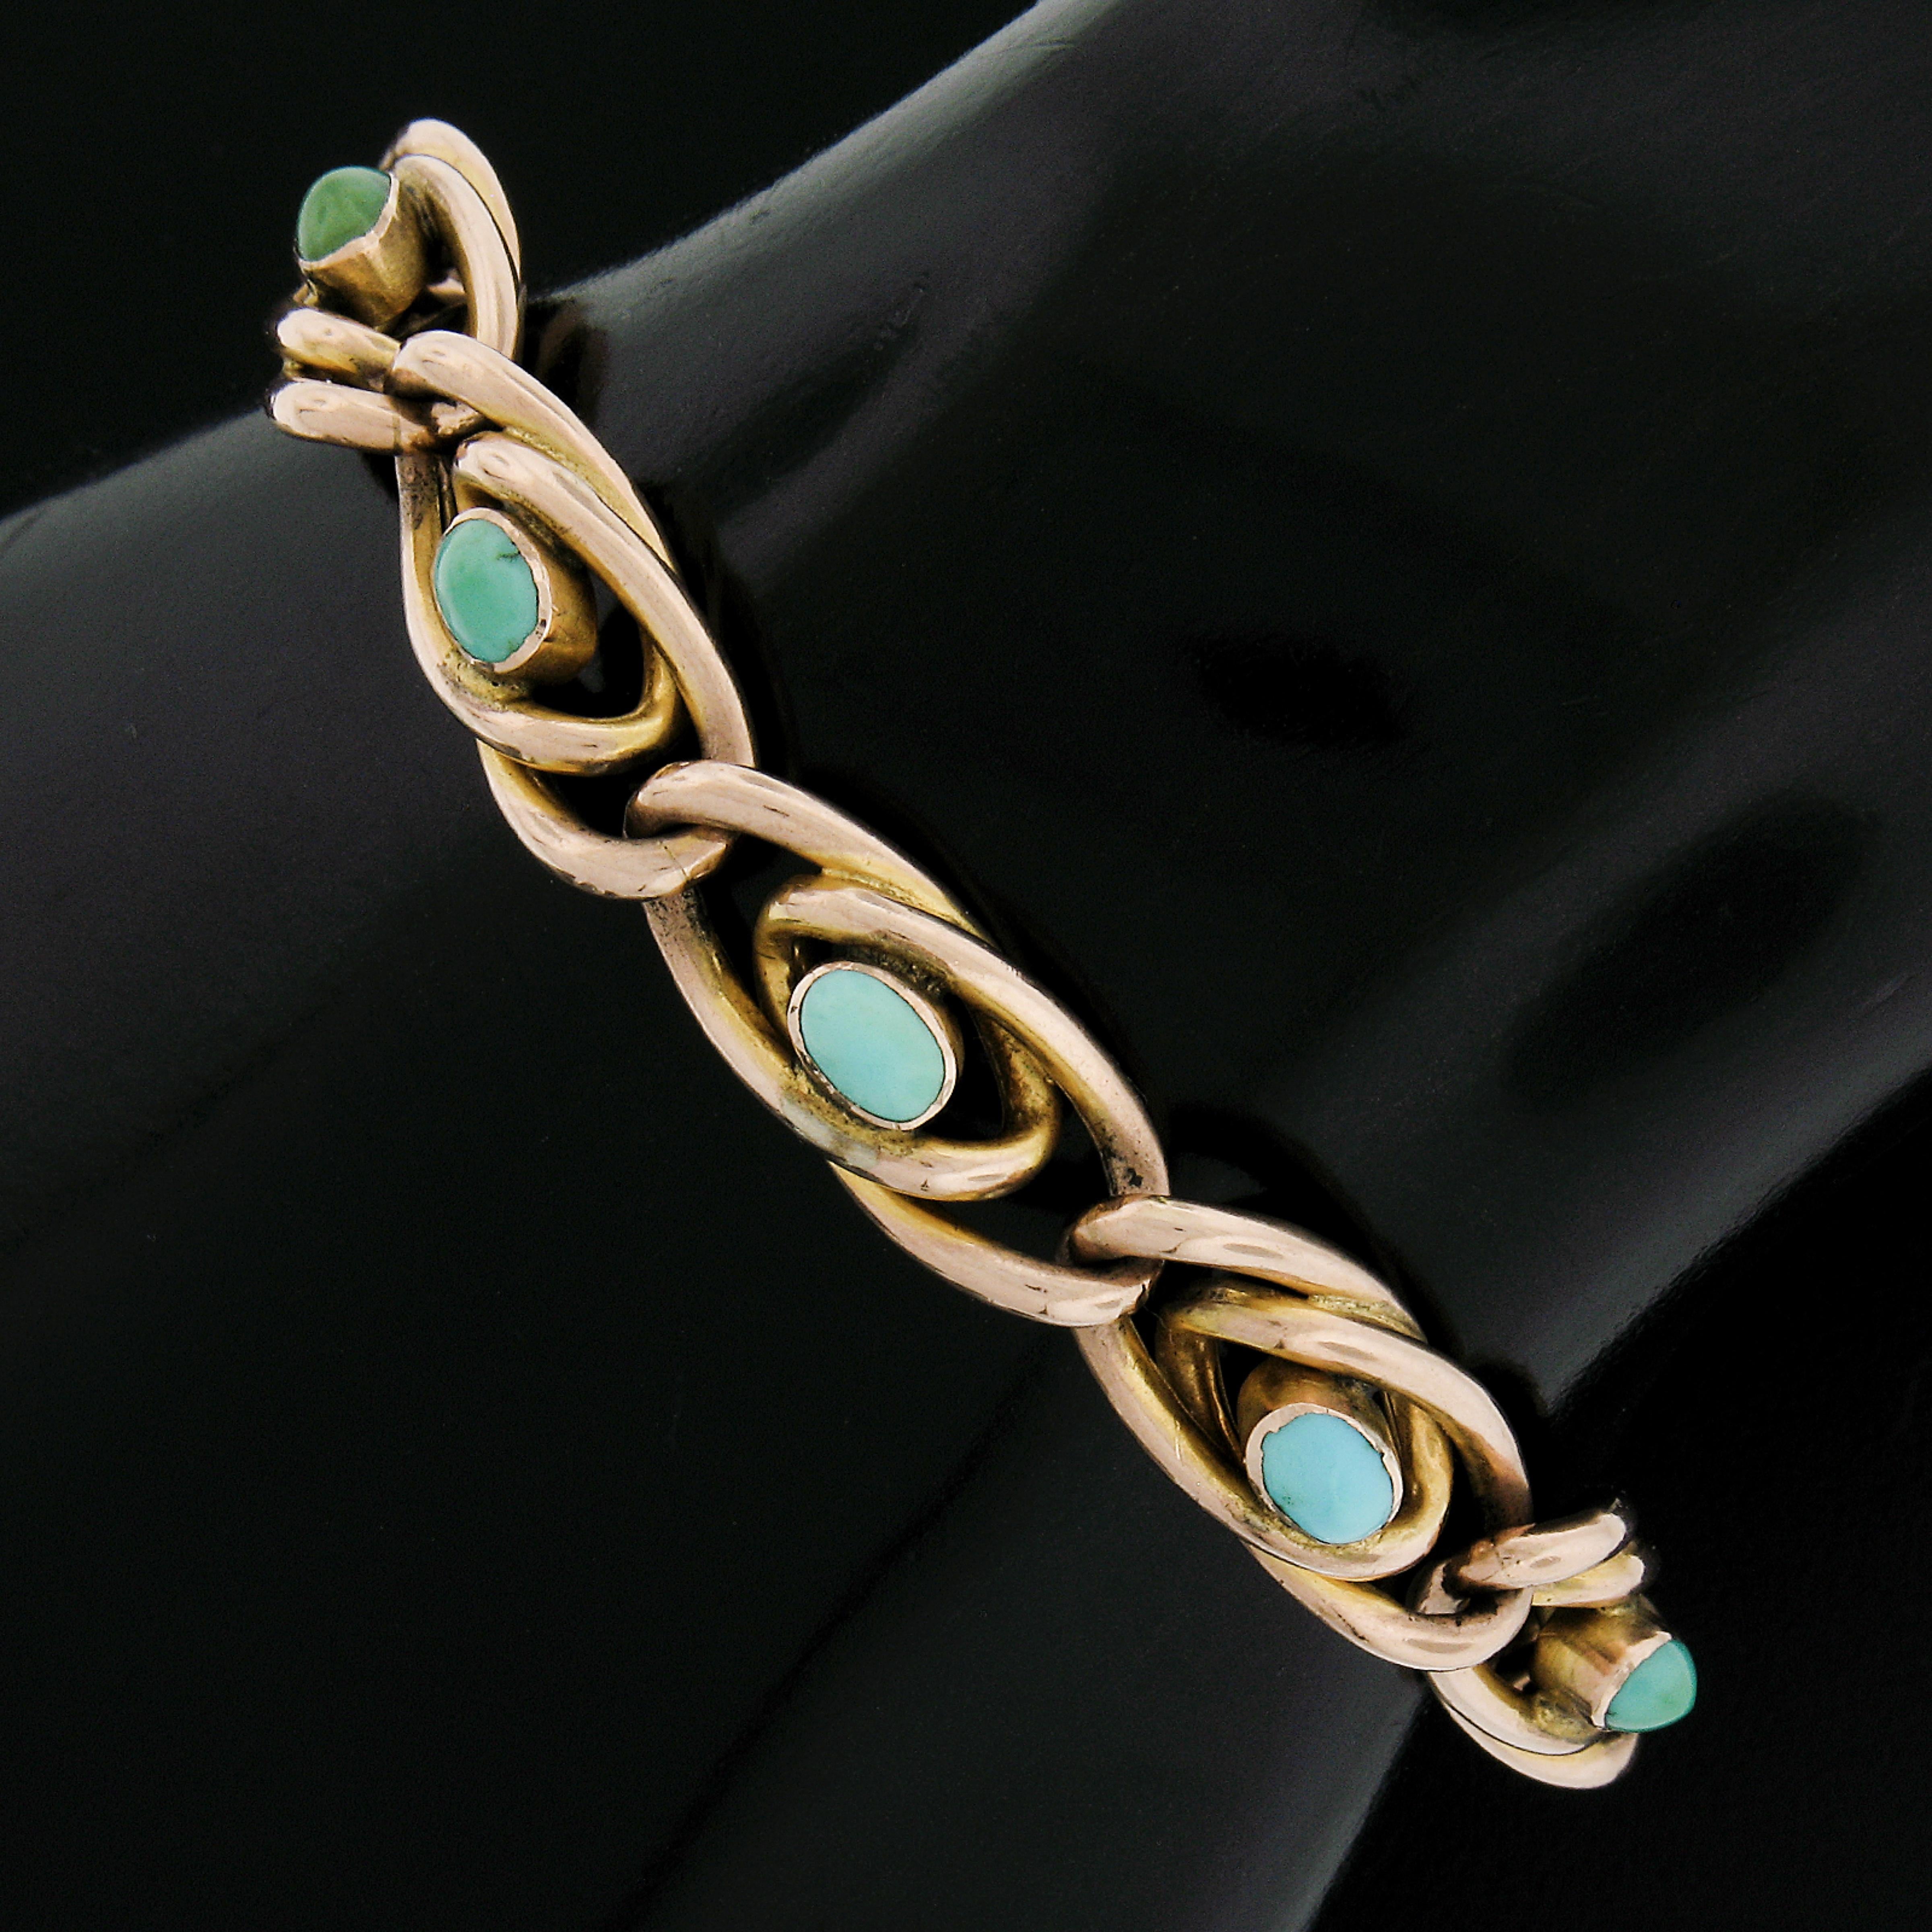 --Stone(s):--
(5) Natural Genuine Turquoise - Oval Cabochon Cut - Bezel Set - Natural Variation of Greenish-Blue Turquoise Color - 5.3x3mm each (approx.)

Material: Solid 9k Rosy Yellow Gold
Weight: 9.73 Grams
Type: Interlocking Curb Link
Length: